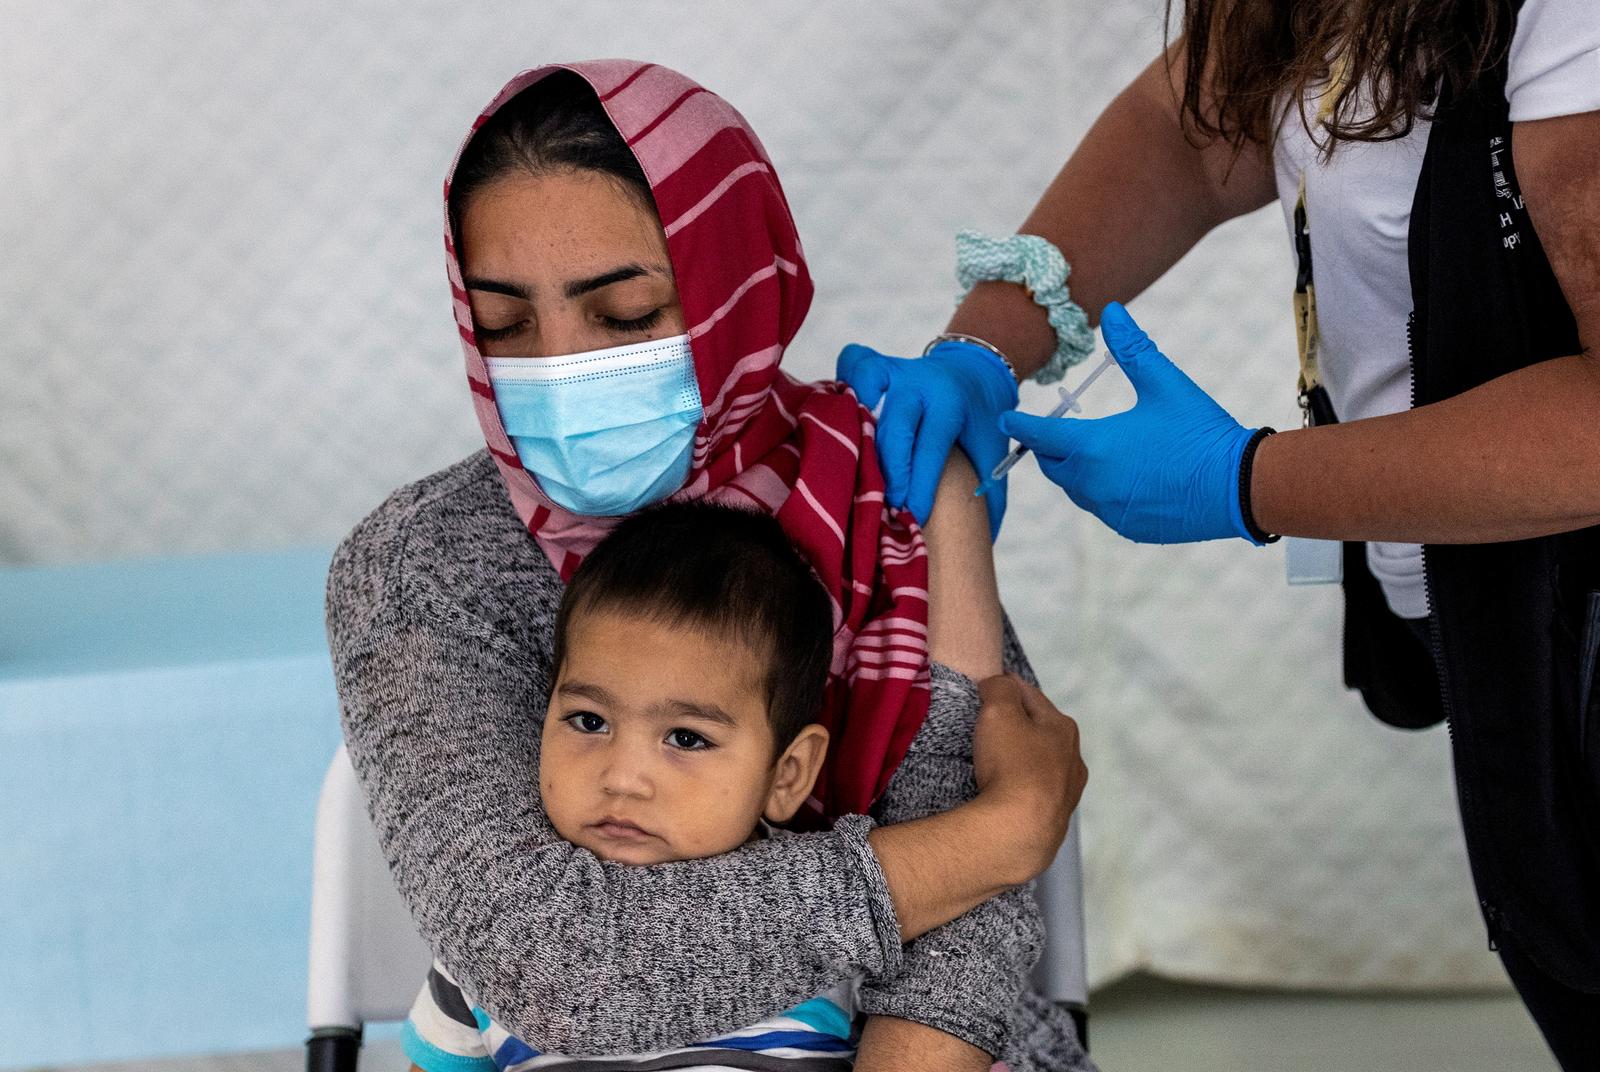 G7 to donate 1 billion COVID-19 vaccine doses to poorer countries